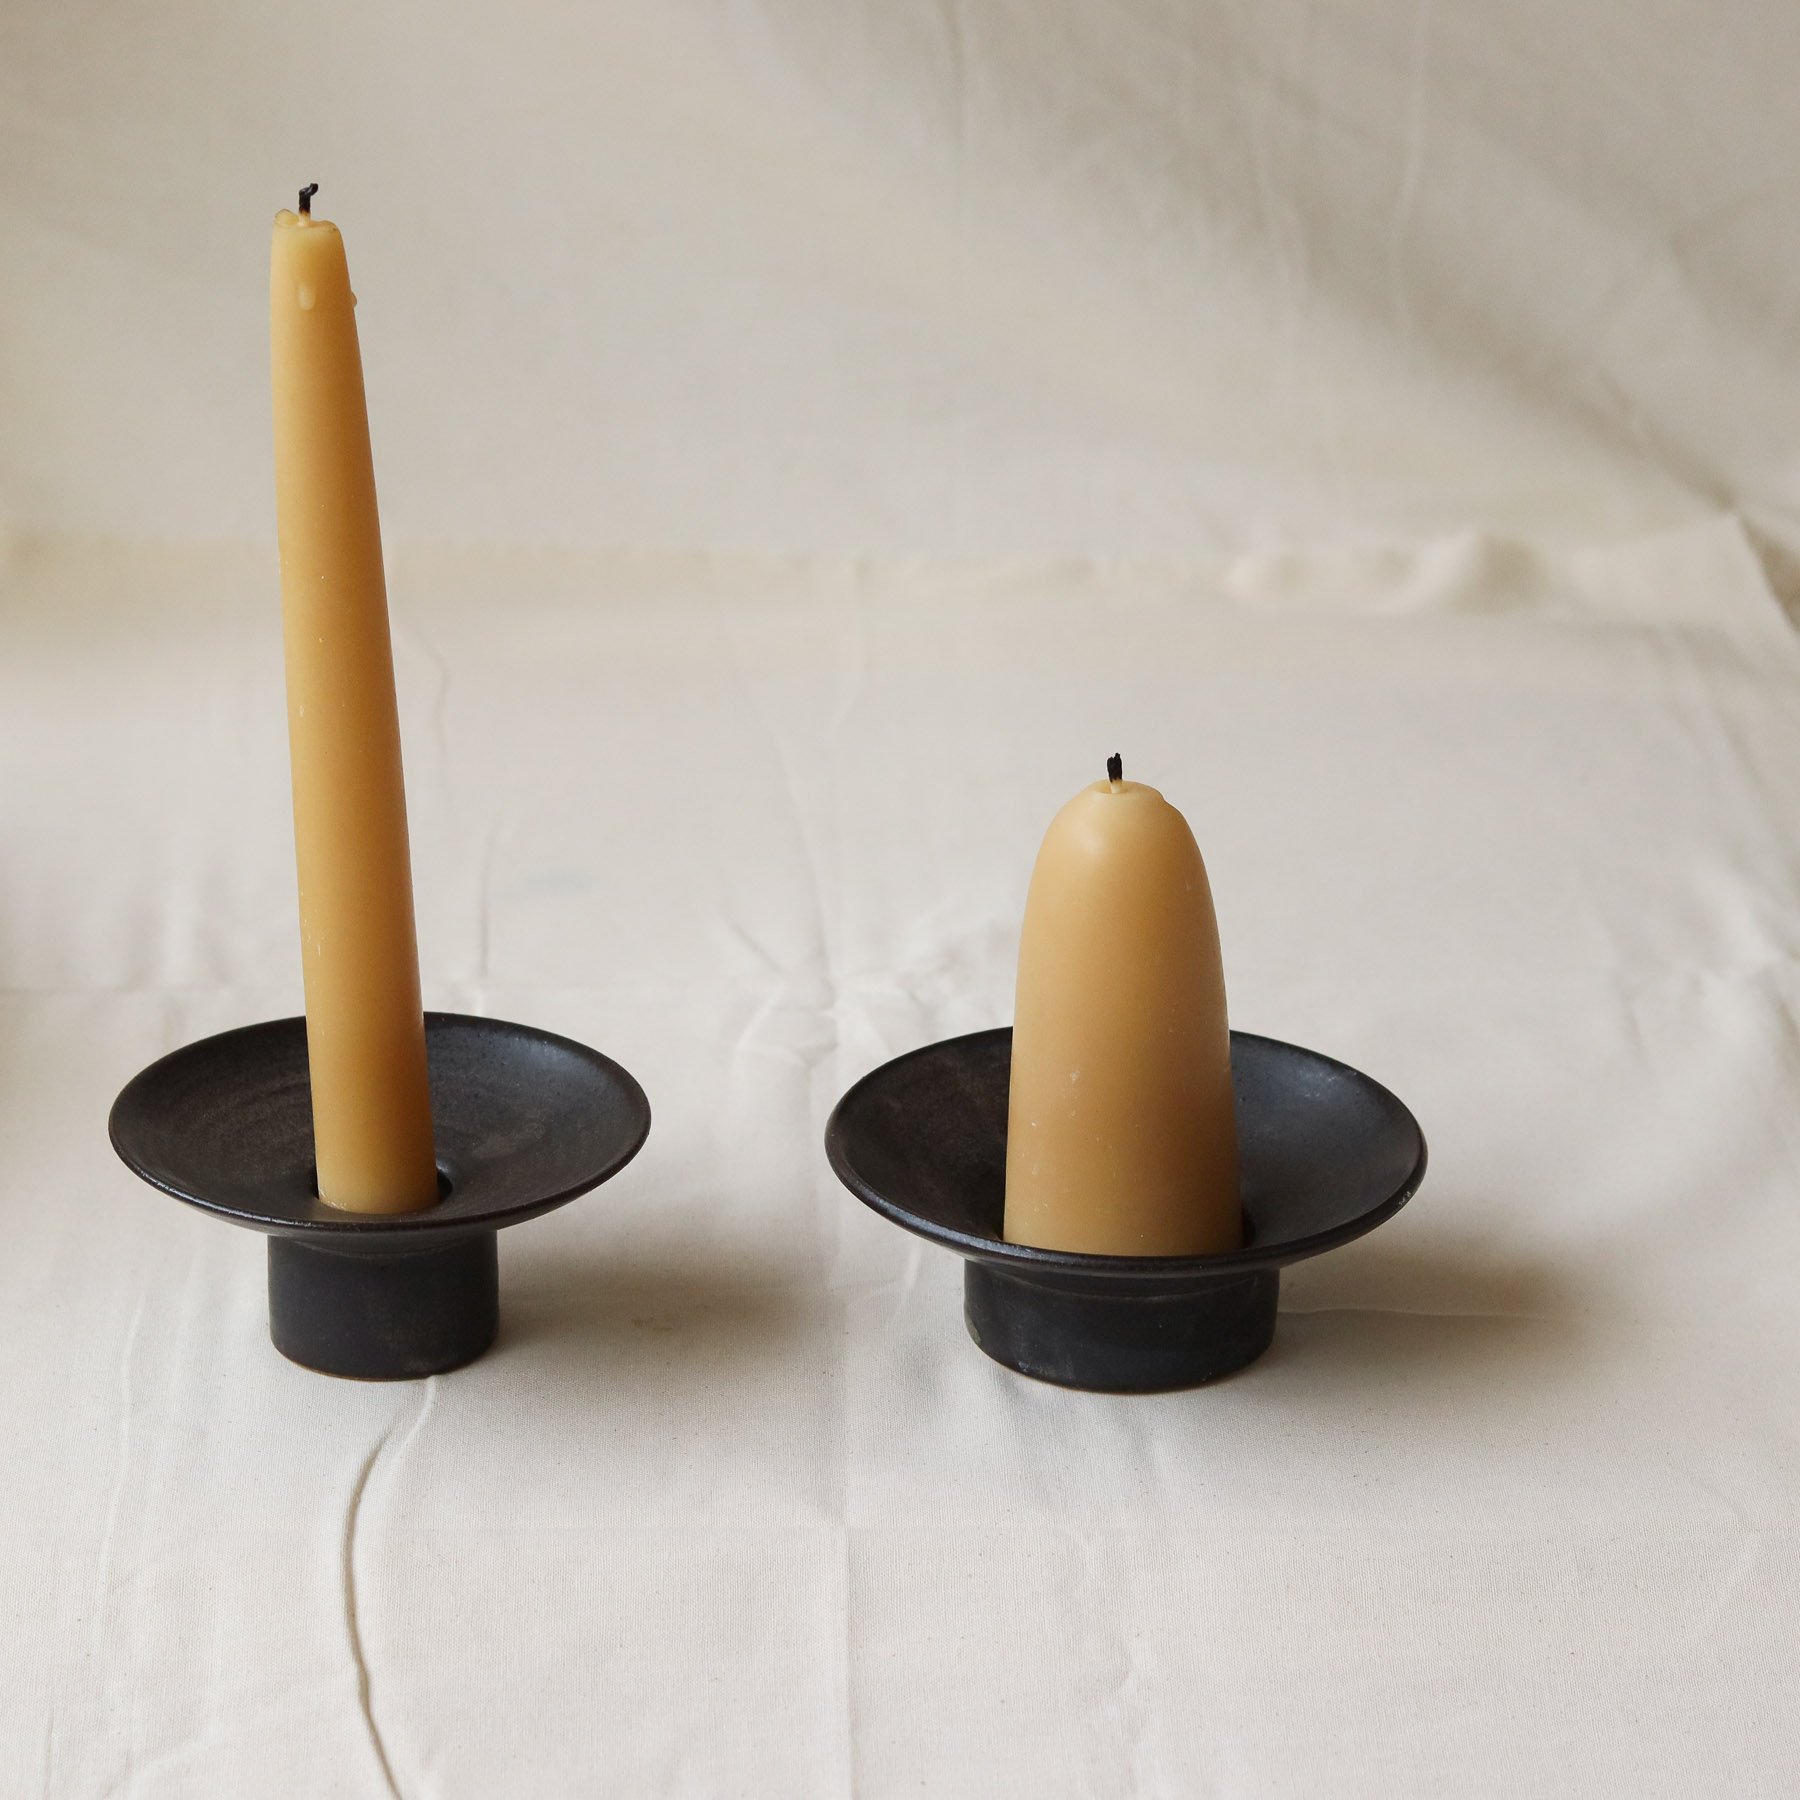 Footed Candle Holders, Flecked-07.jpg